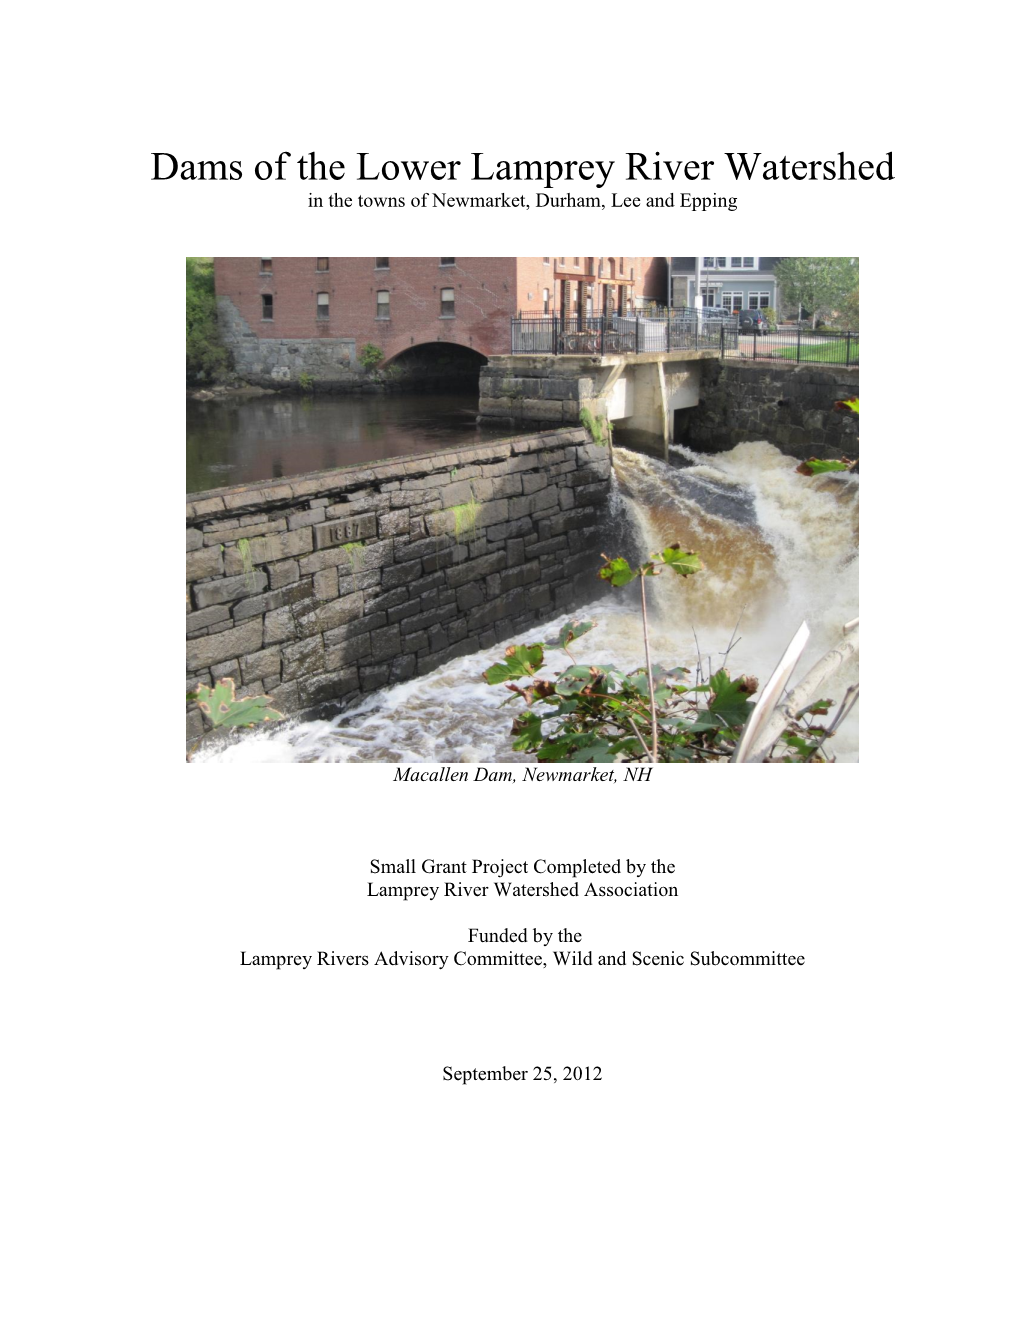 Dams of the Lower Lamprey River Watershed in the Towns of Newmarket, Durham, Lee and Epping